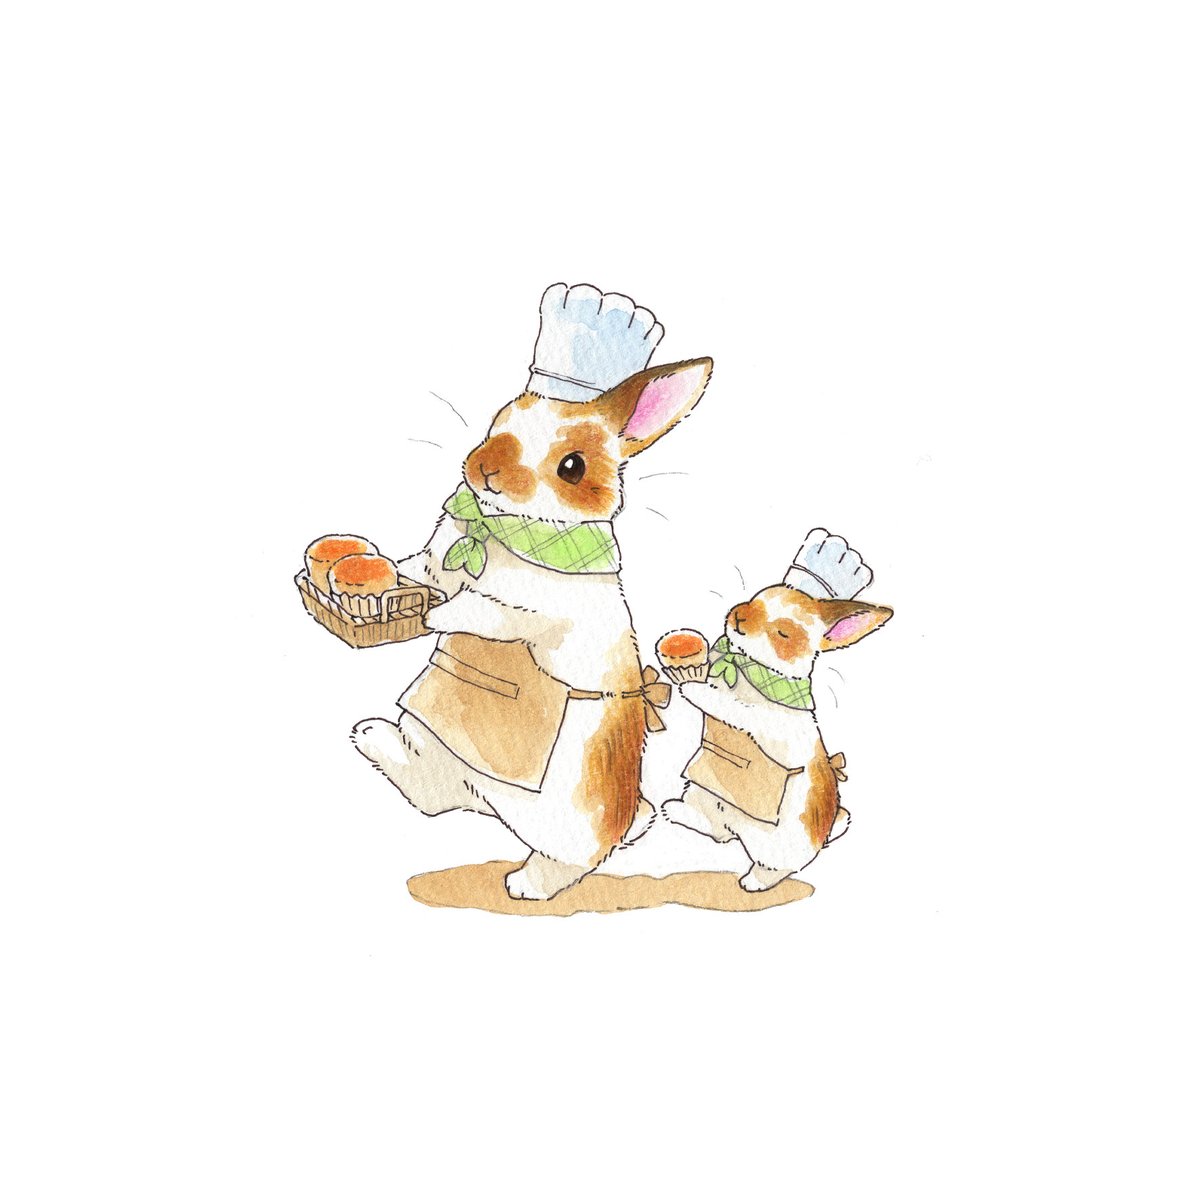 hat chef hat no humans white background holding apron green scarf  illustration images